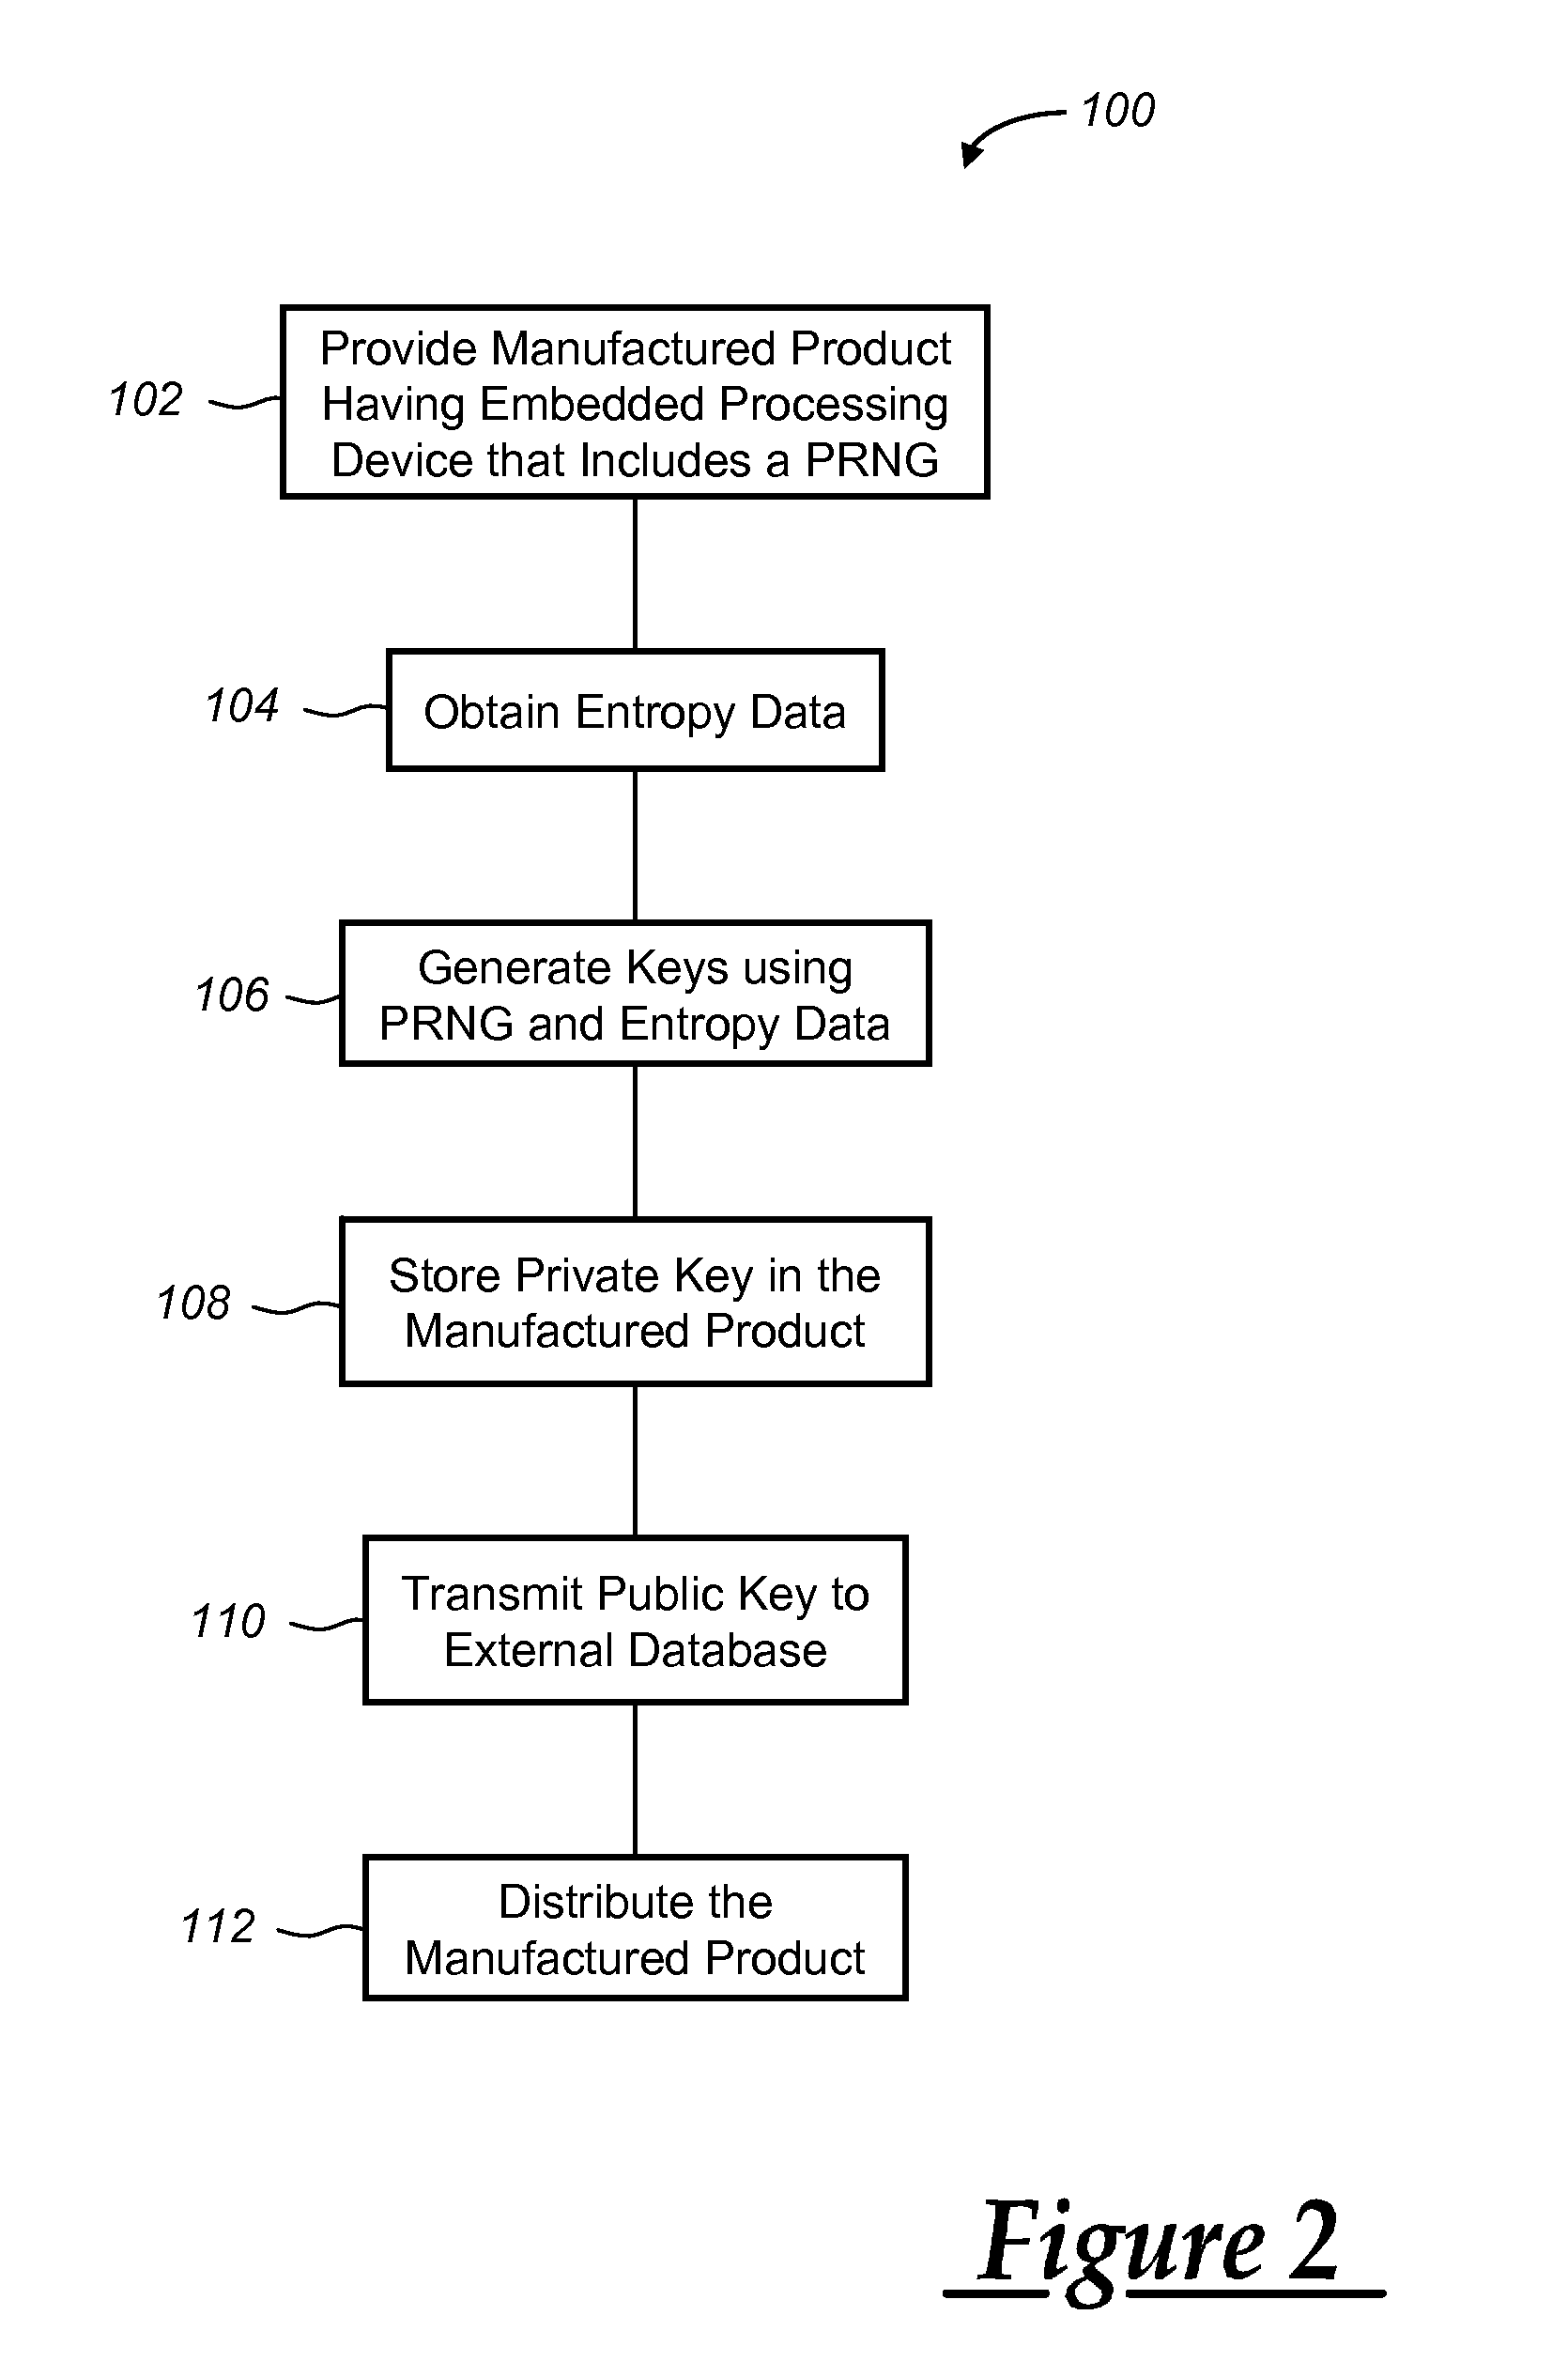 Production of cryptographic keys for an embedded processing device